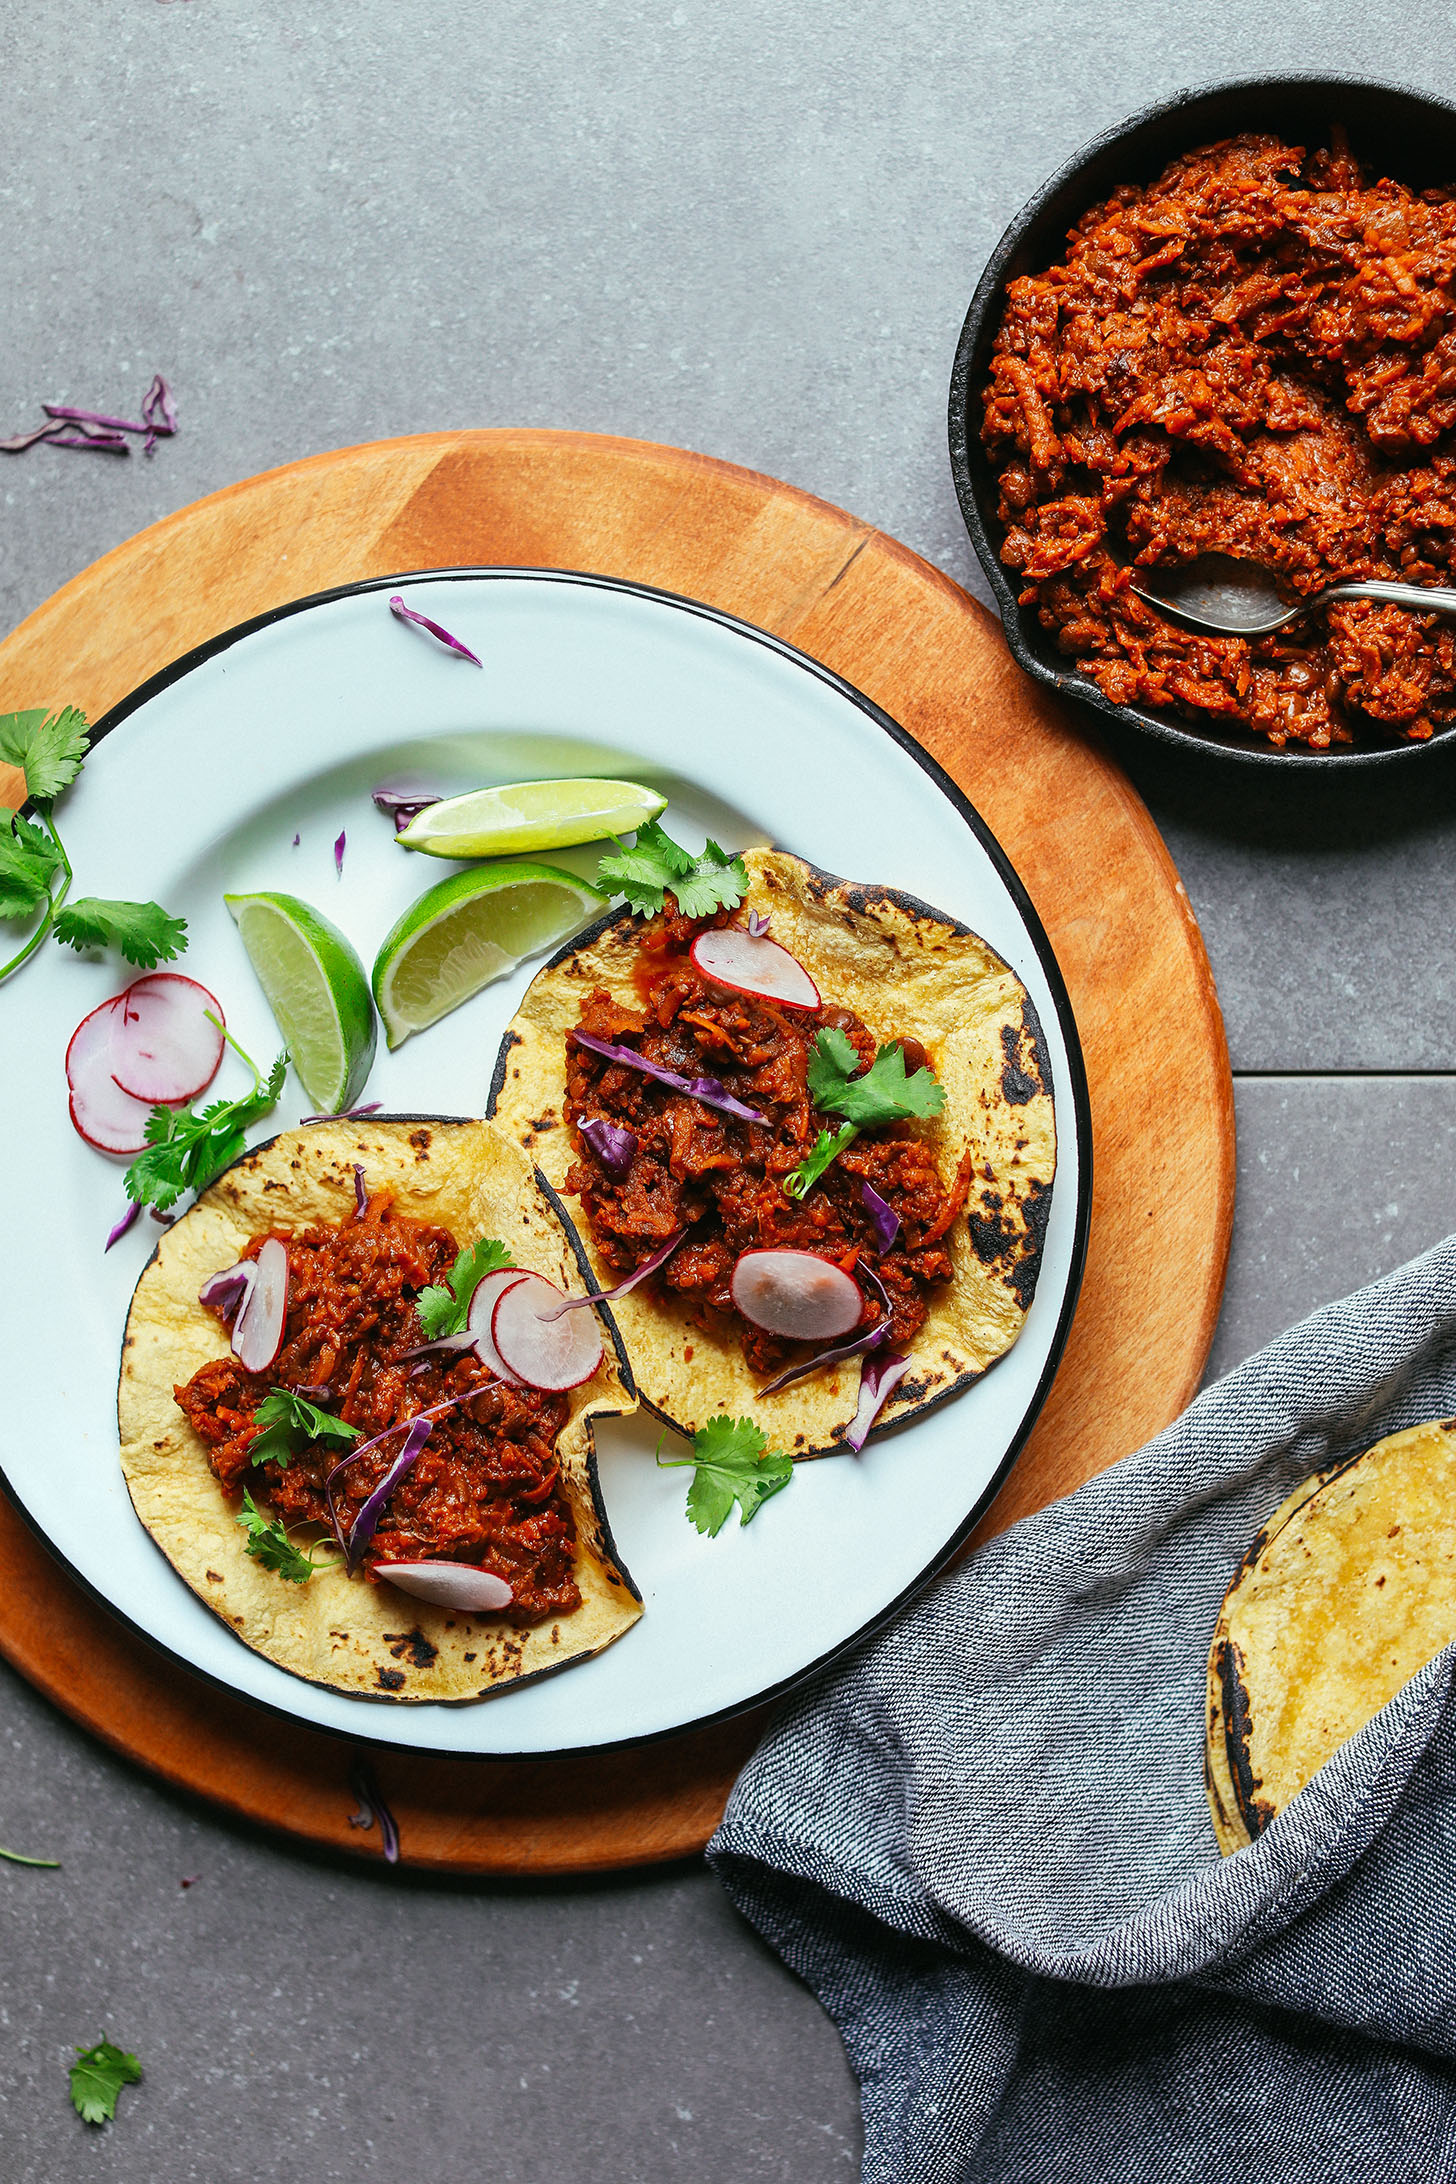 Plate with corn tortillas filled with Vegan Barbacoa for healthy plant-based tacos